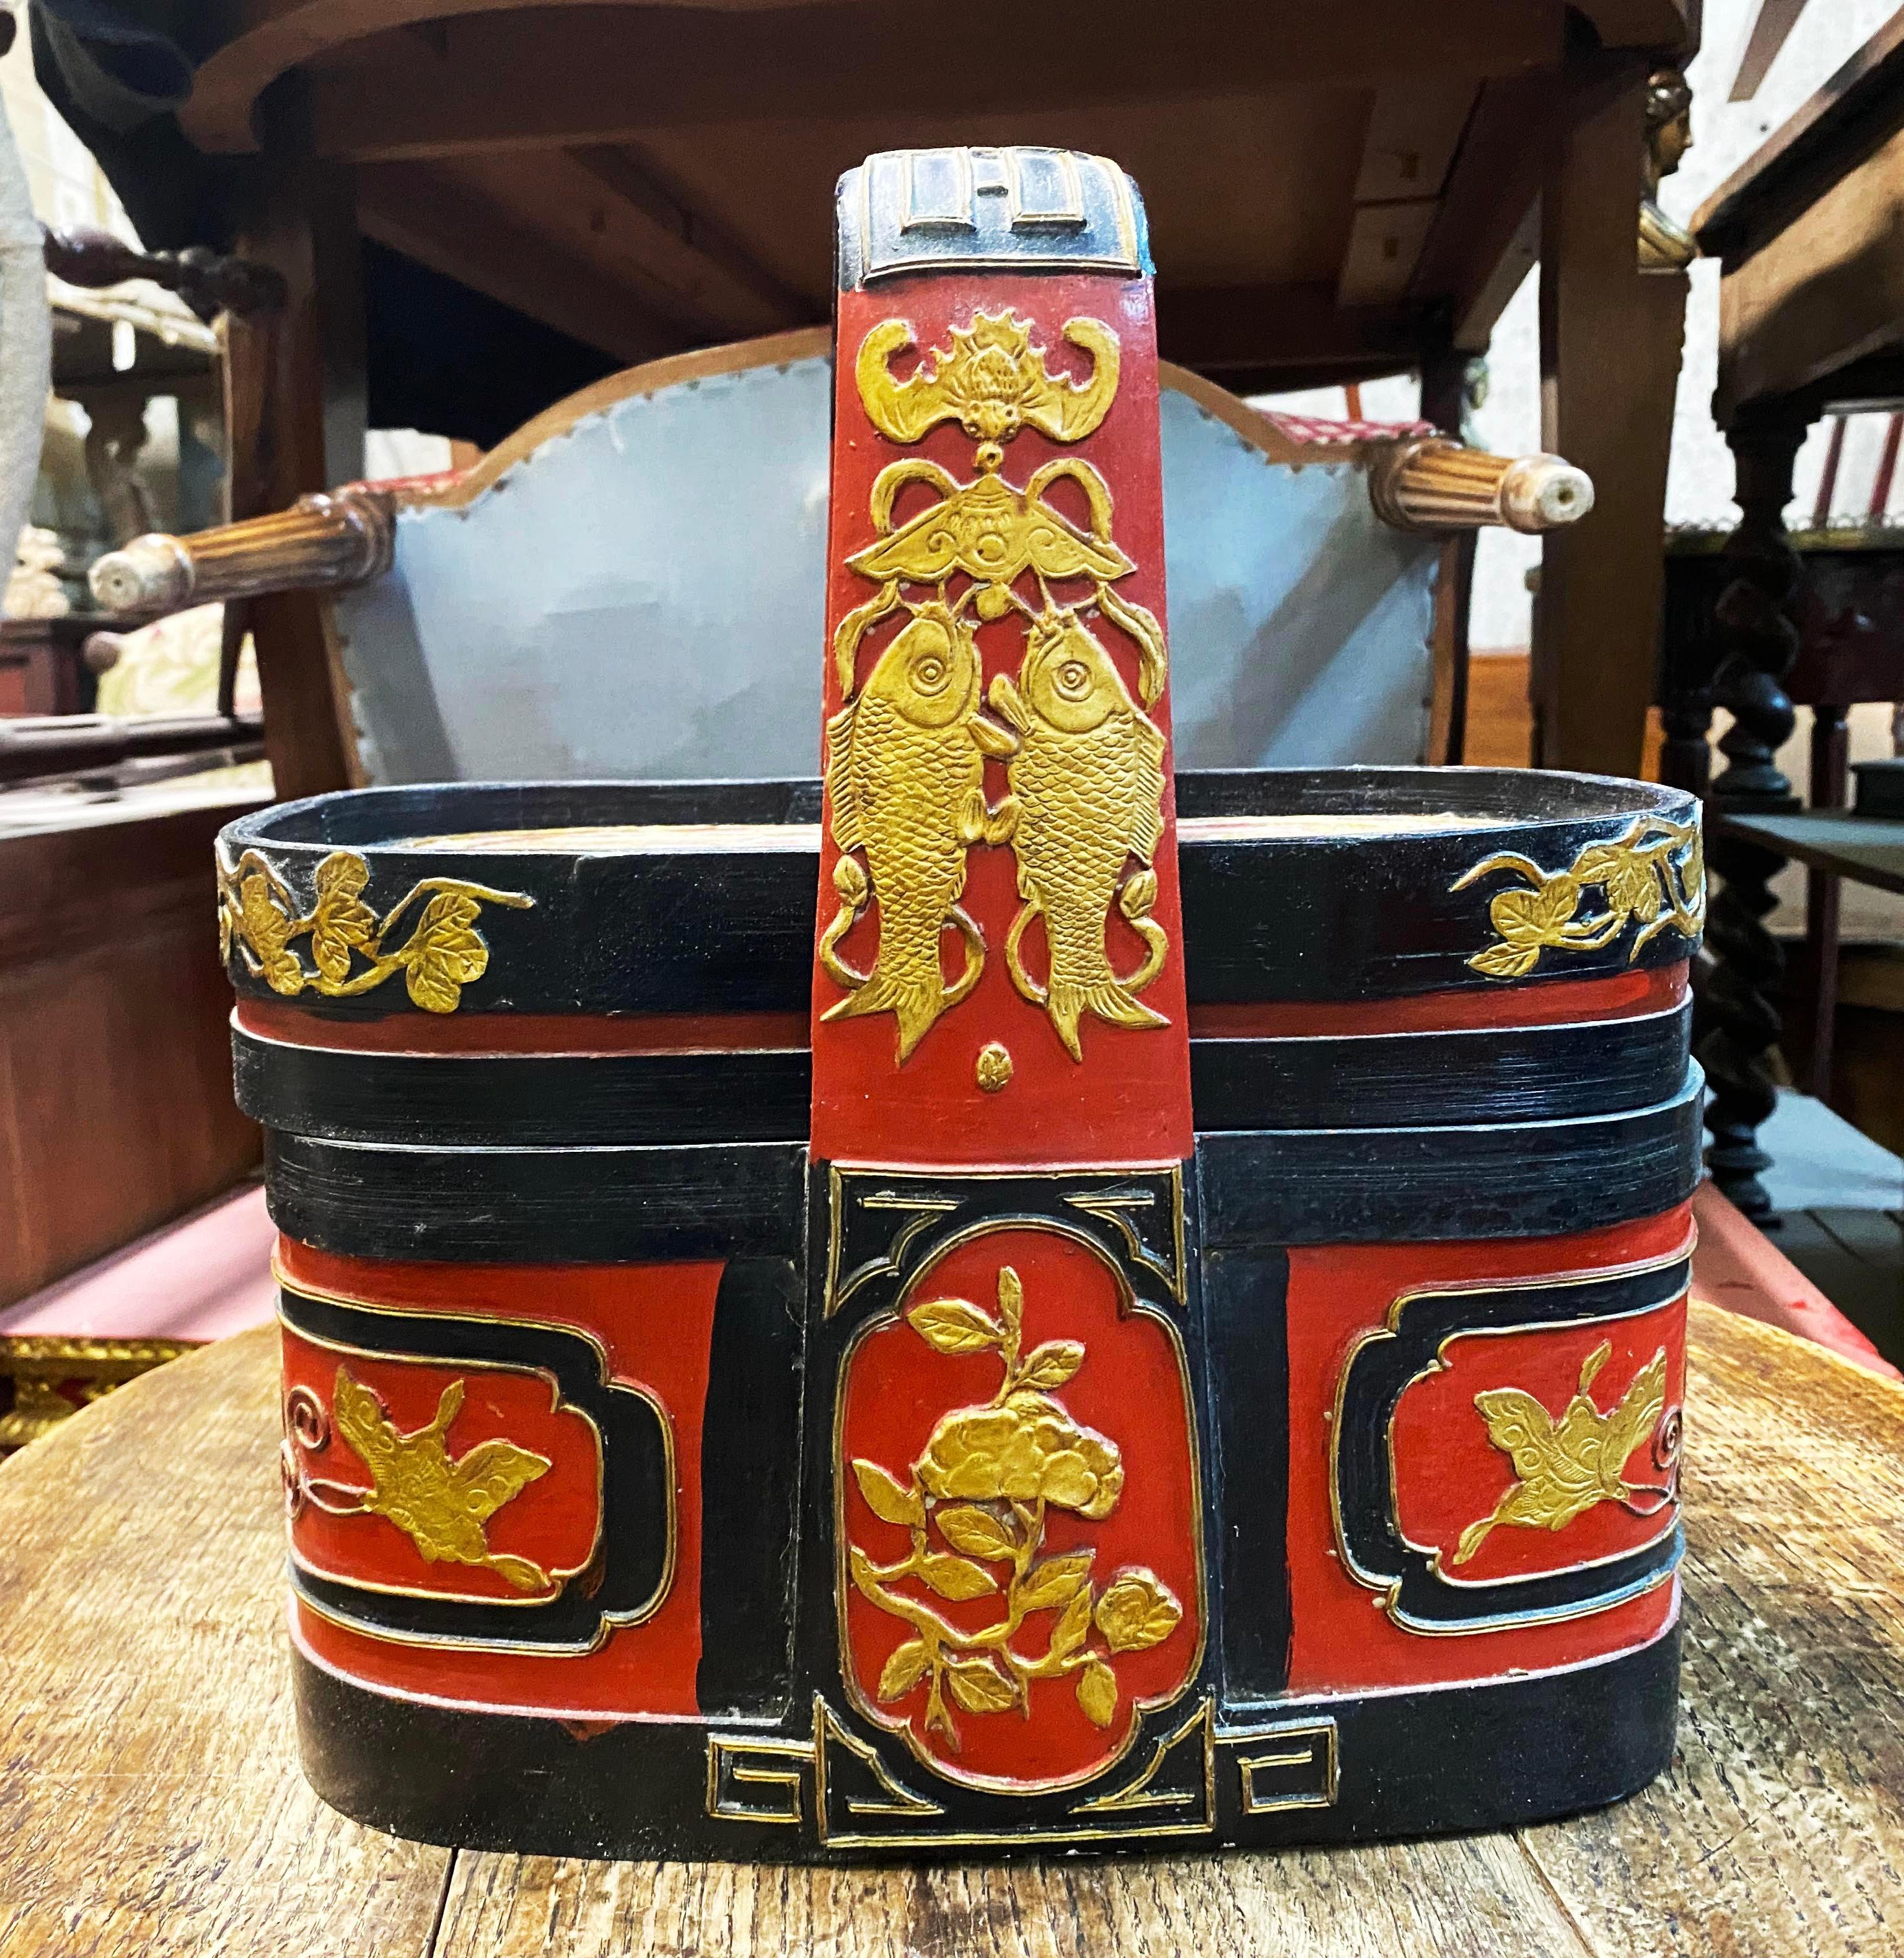 Antique Chinese Wooden Wedding Basket (c. 1860 - 1880) with red and black lacquer finish. So-called Peking opera basket. Top in gold leaf design depicts a Chinese sage on horseback with attendants. Pair of carp fish appear on the handles and peony